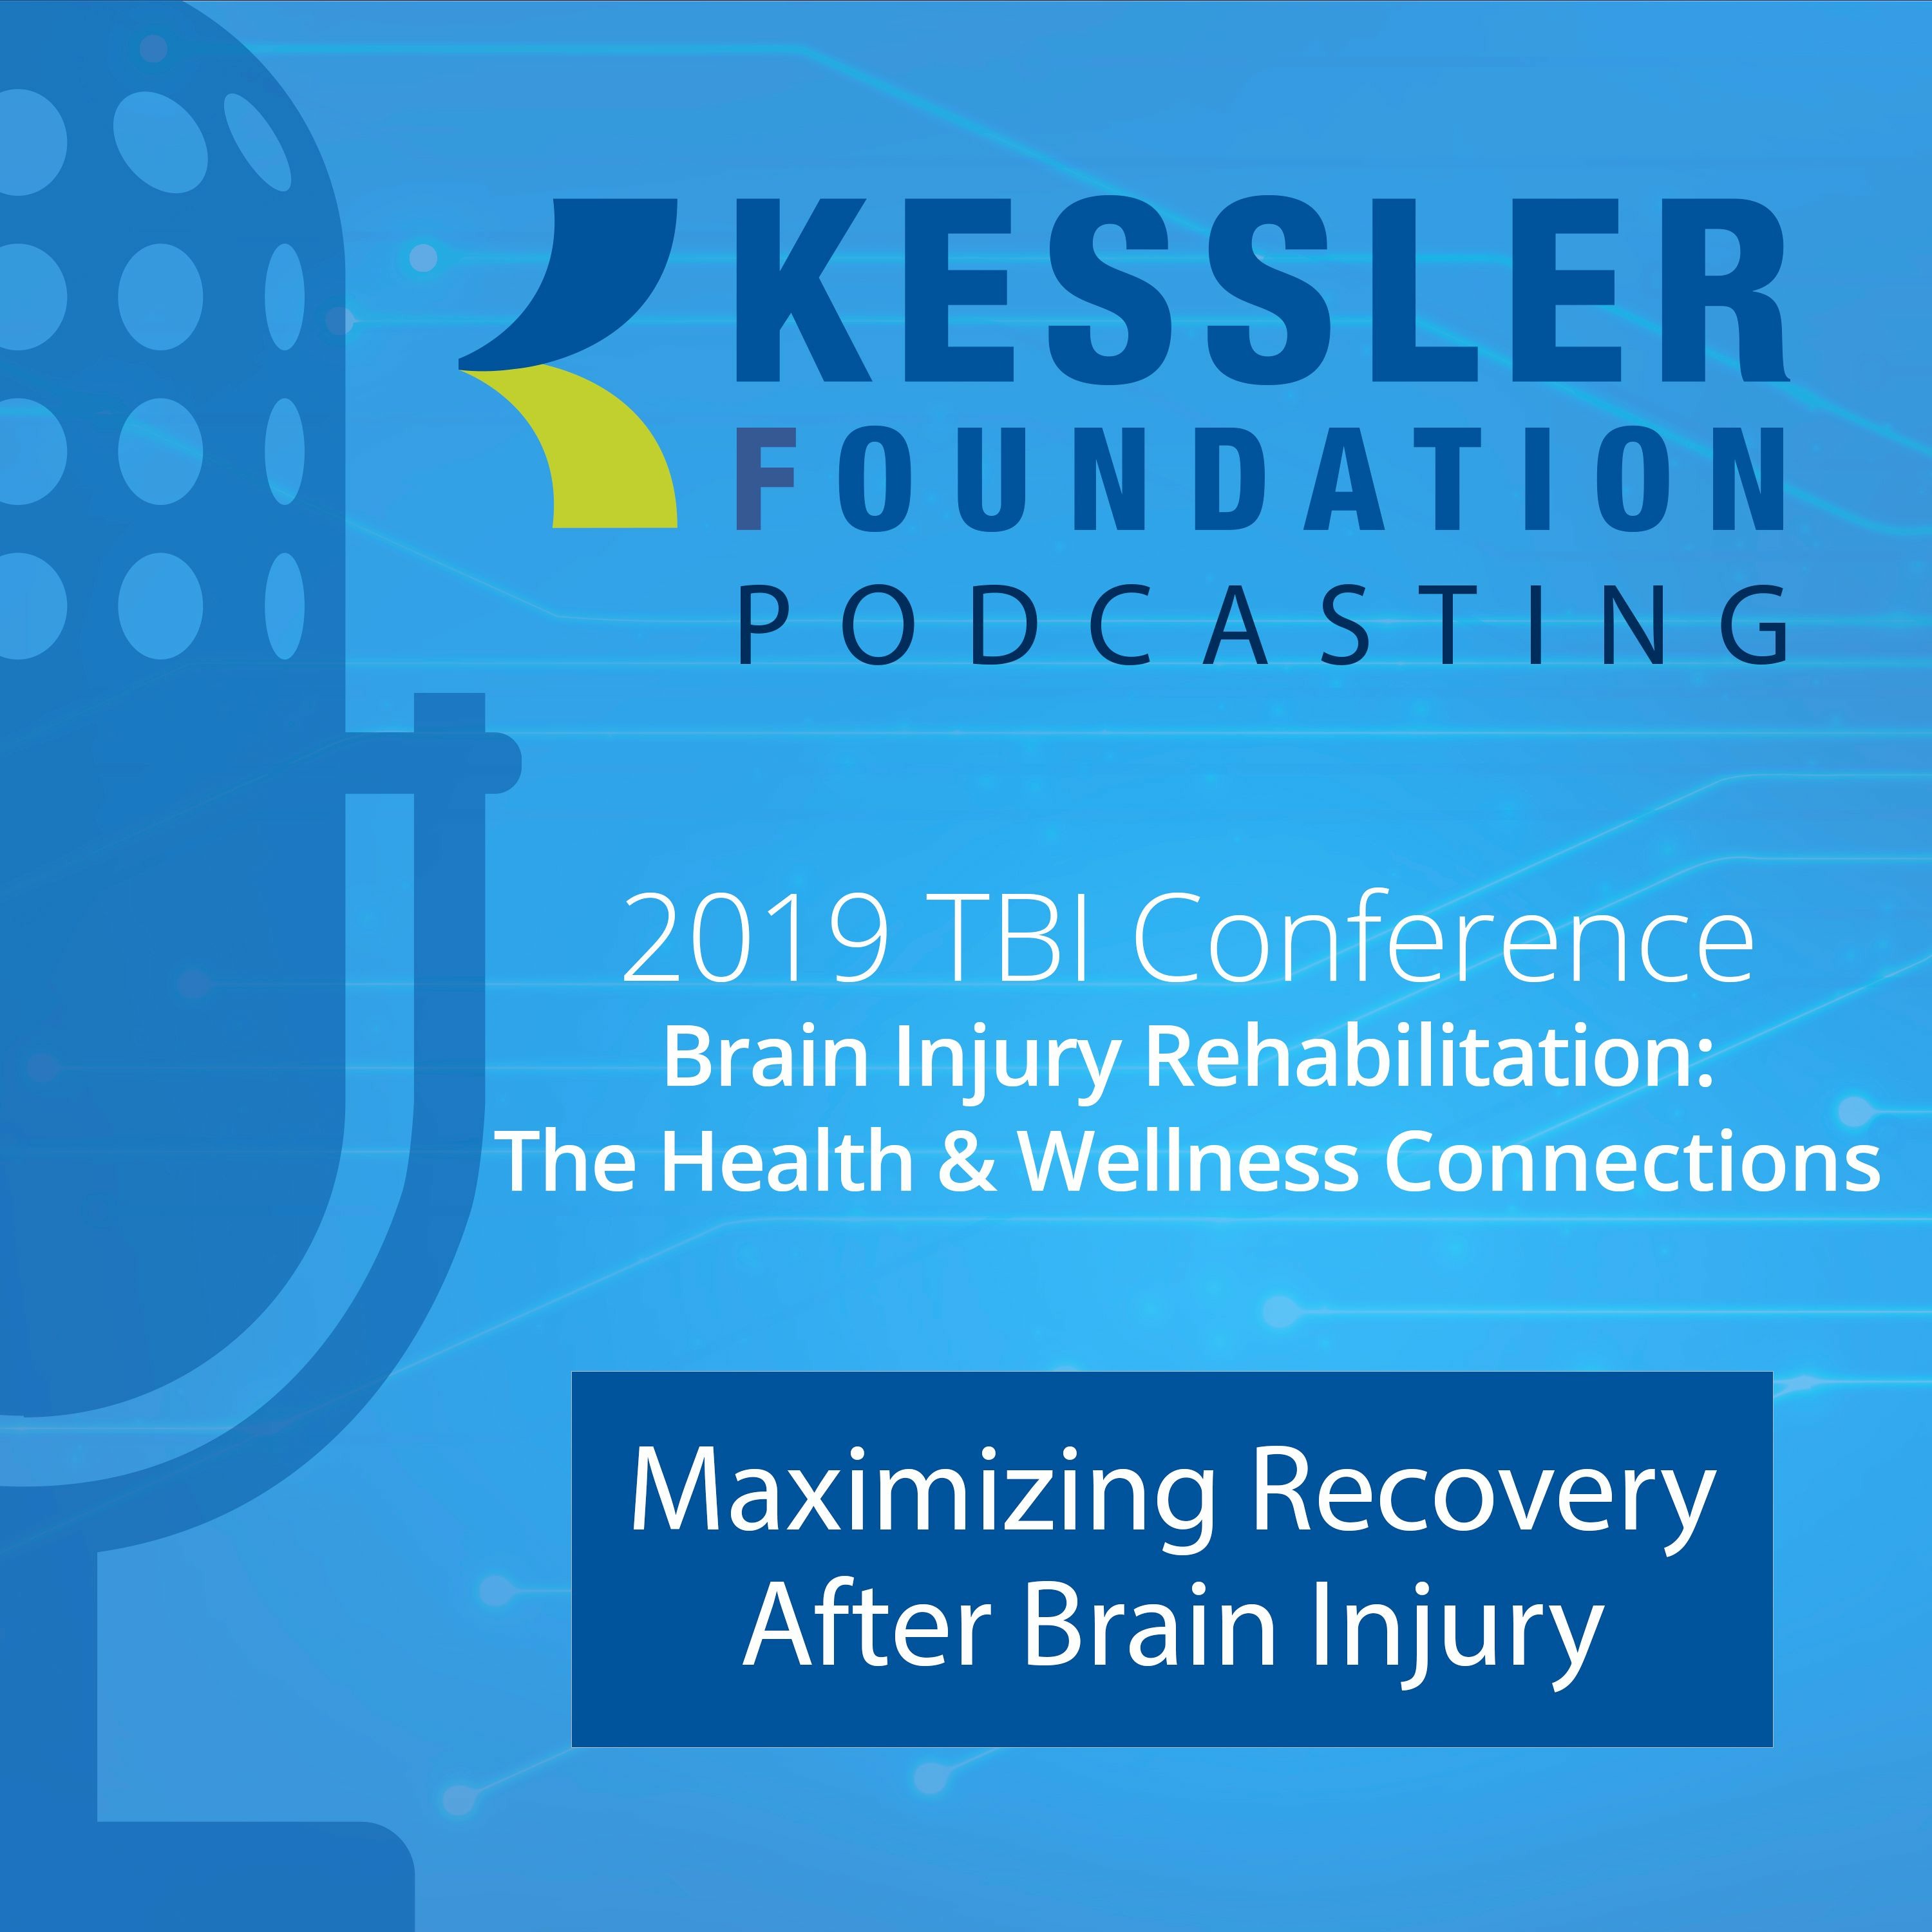 Maximizing Recovery After Brain Injury